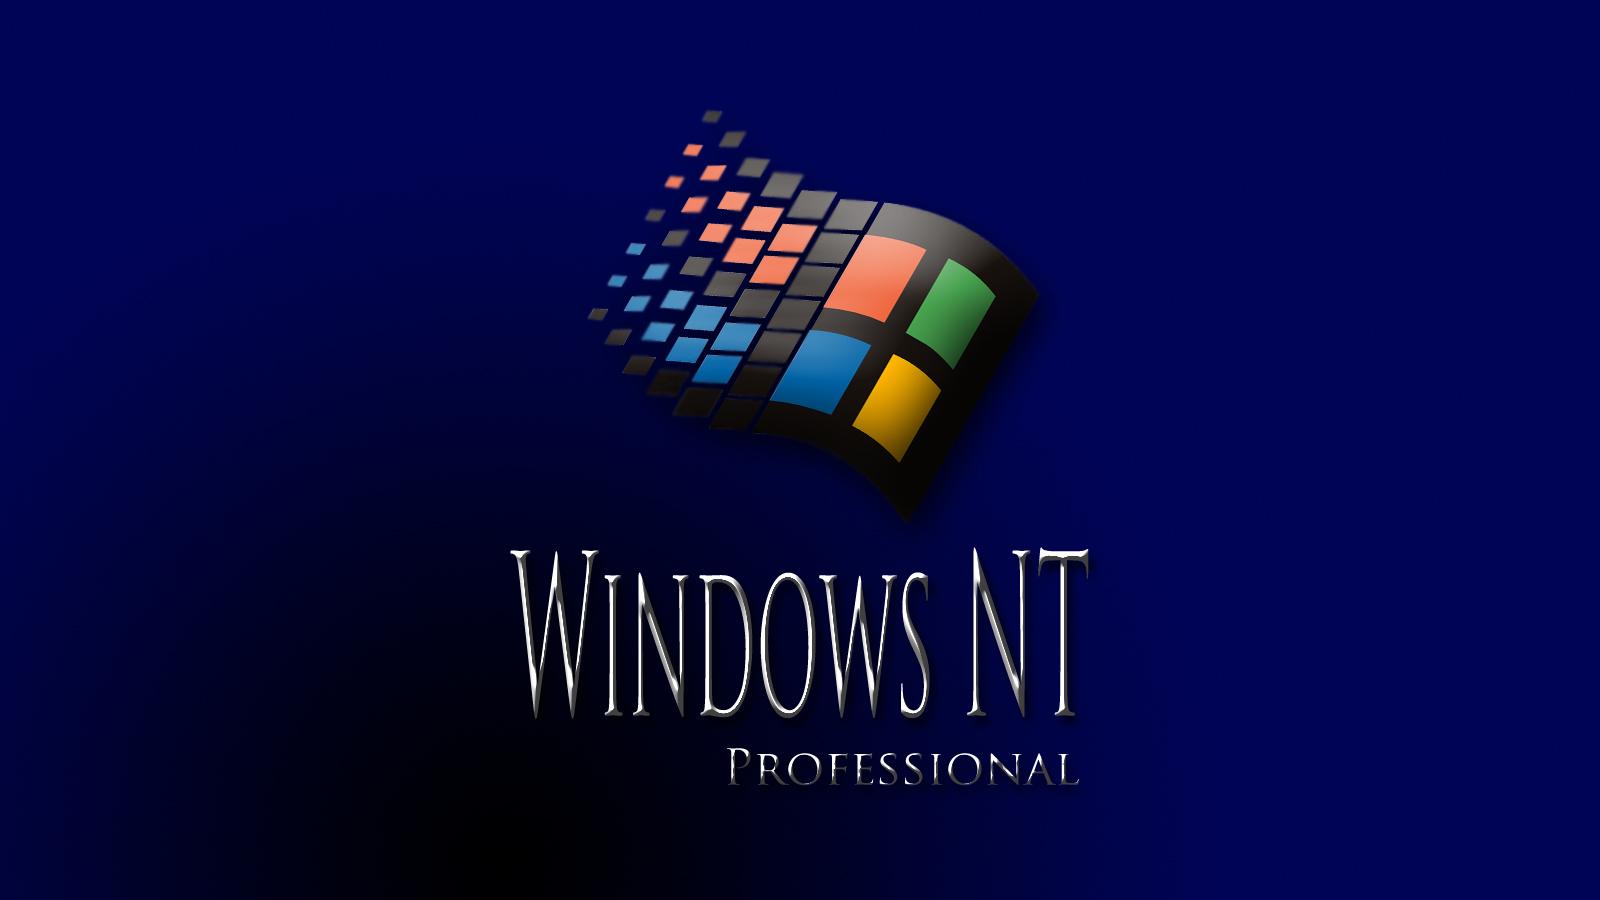 Windows Nt Wallpaper Image Gallery For